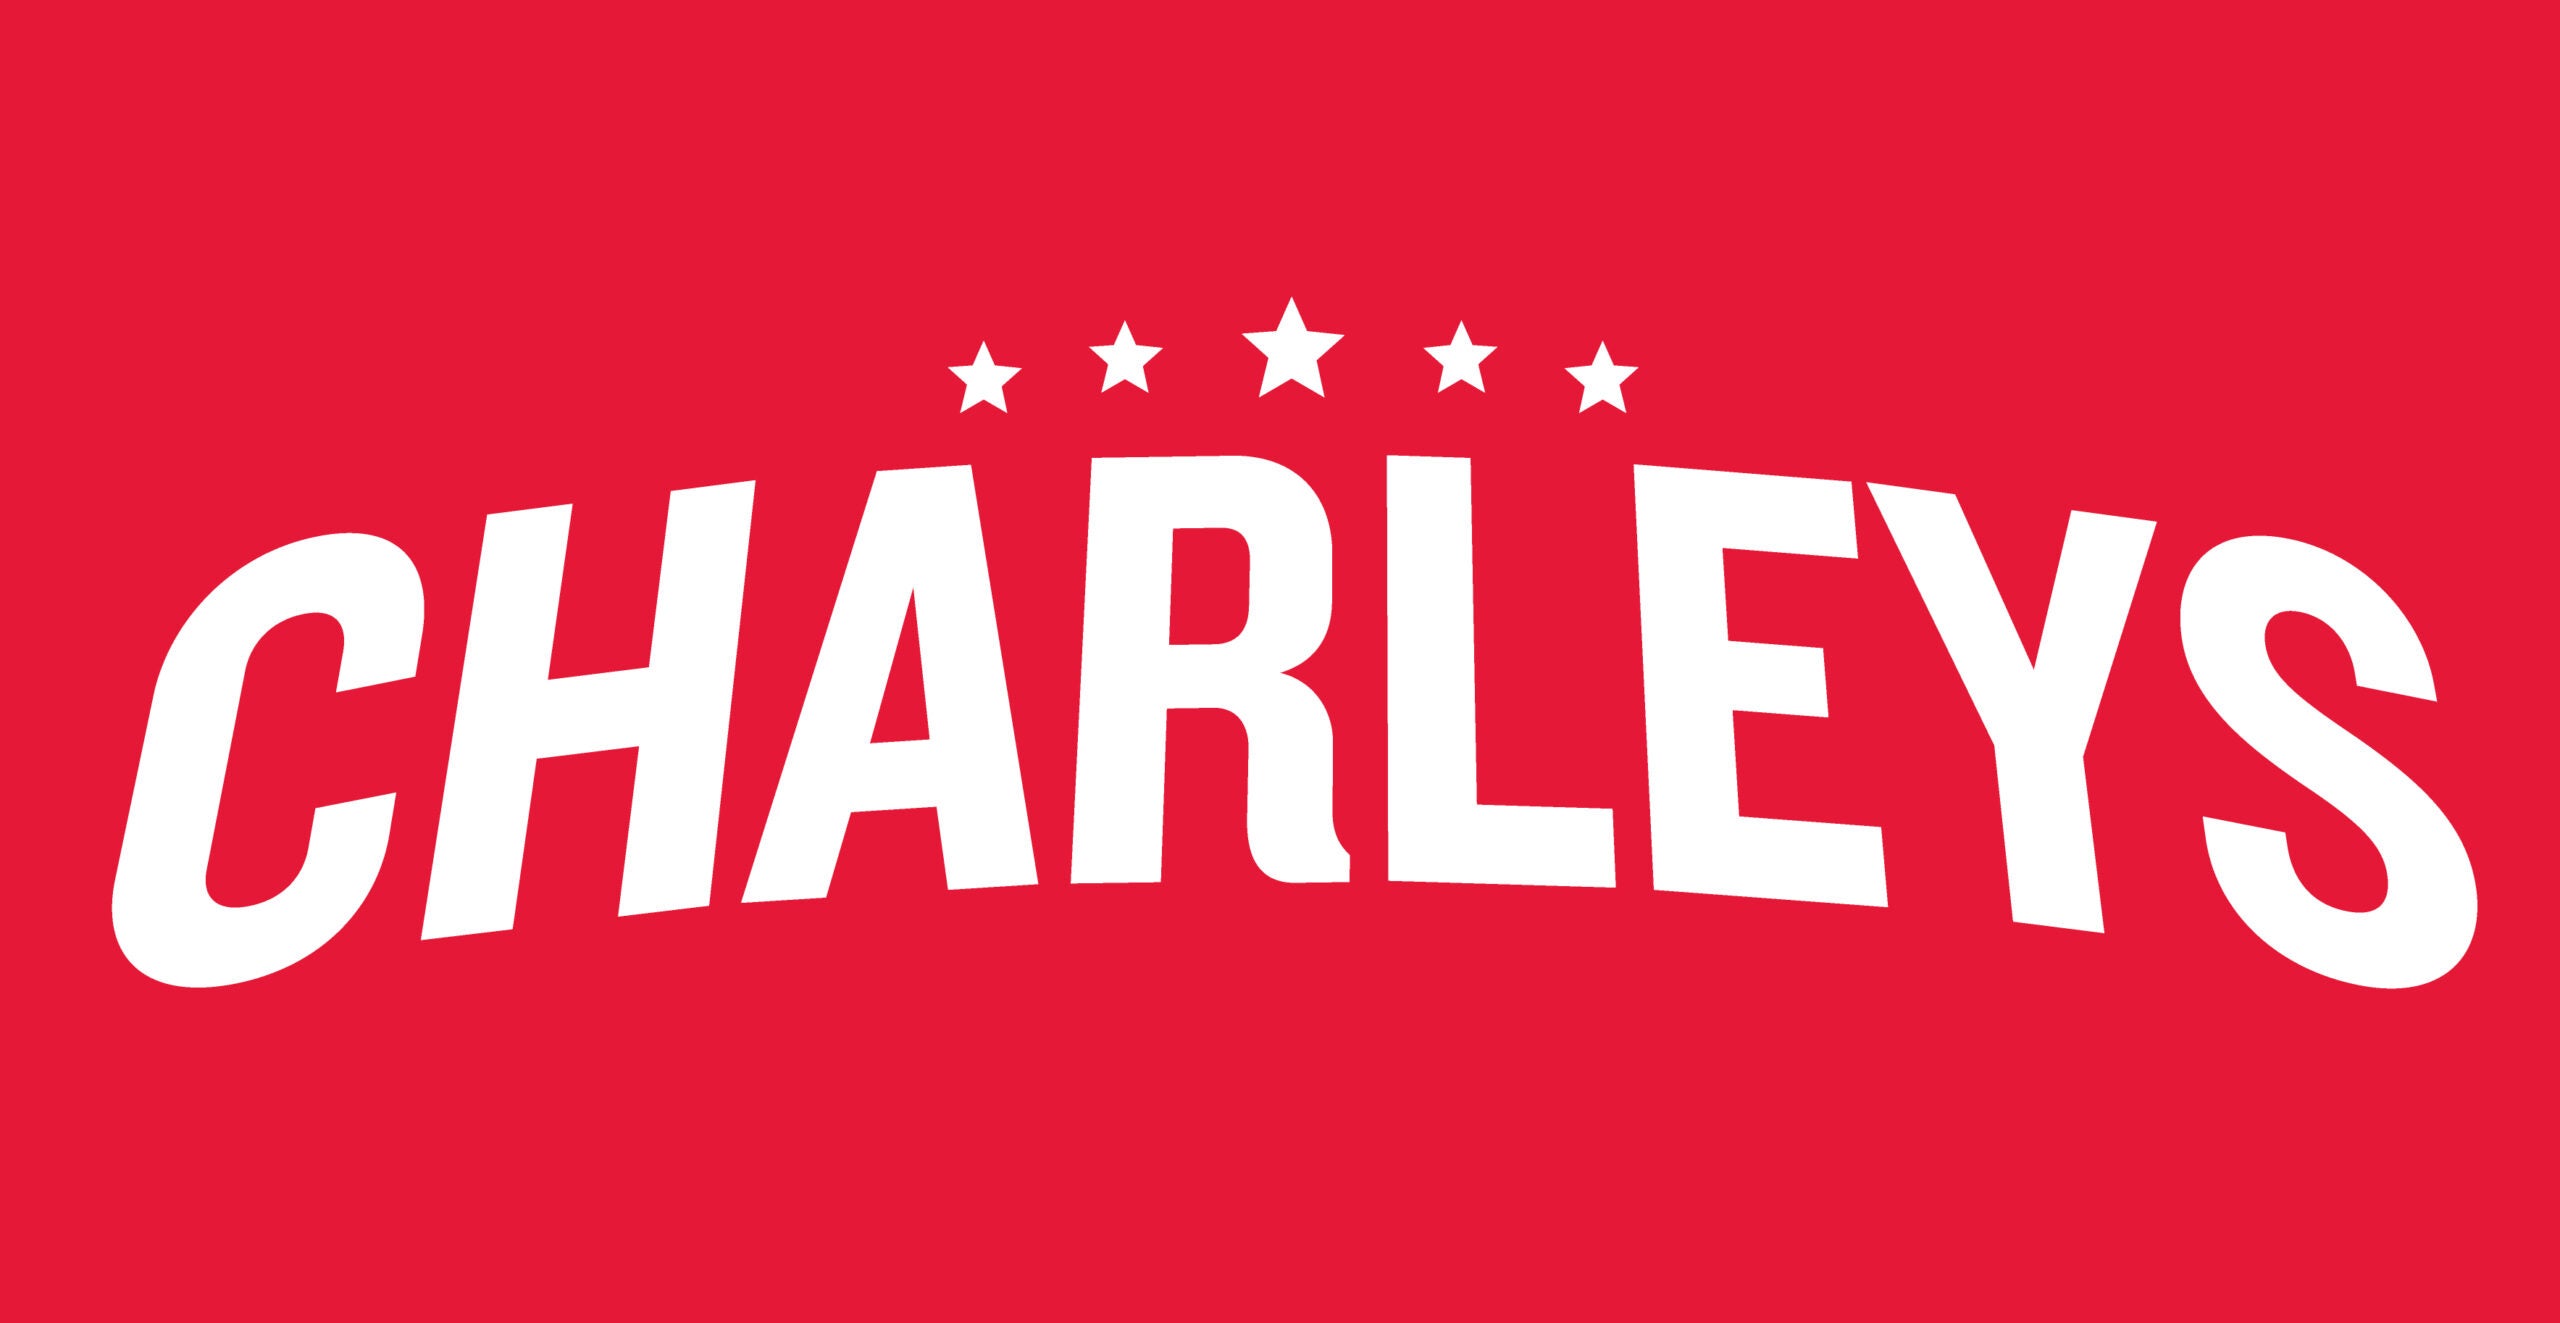 Charleys logo in white against a red background.